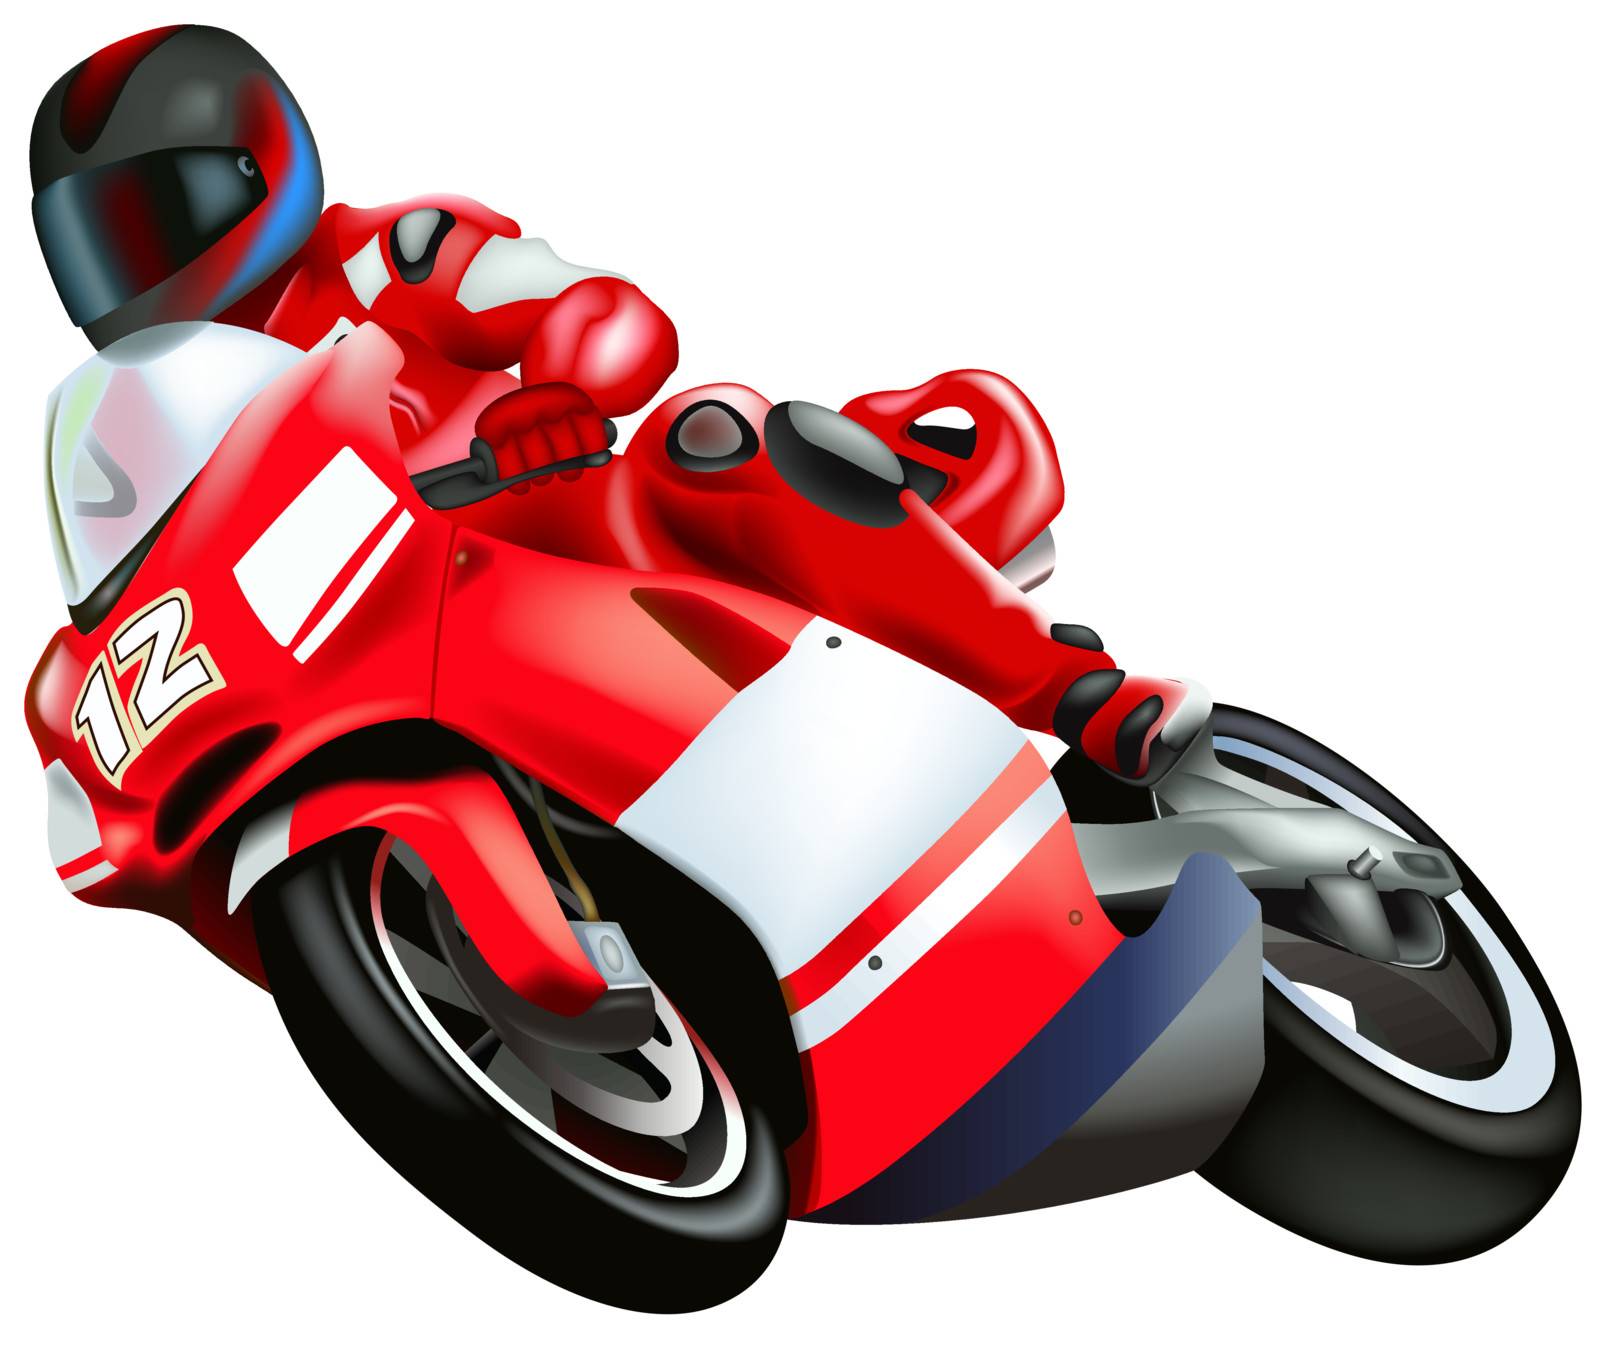 Motorcycle - Colored Illustration, Vector